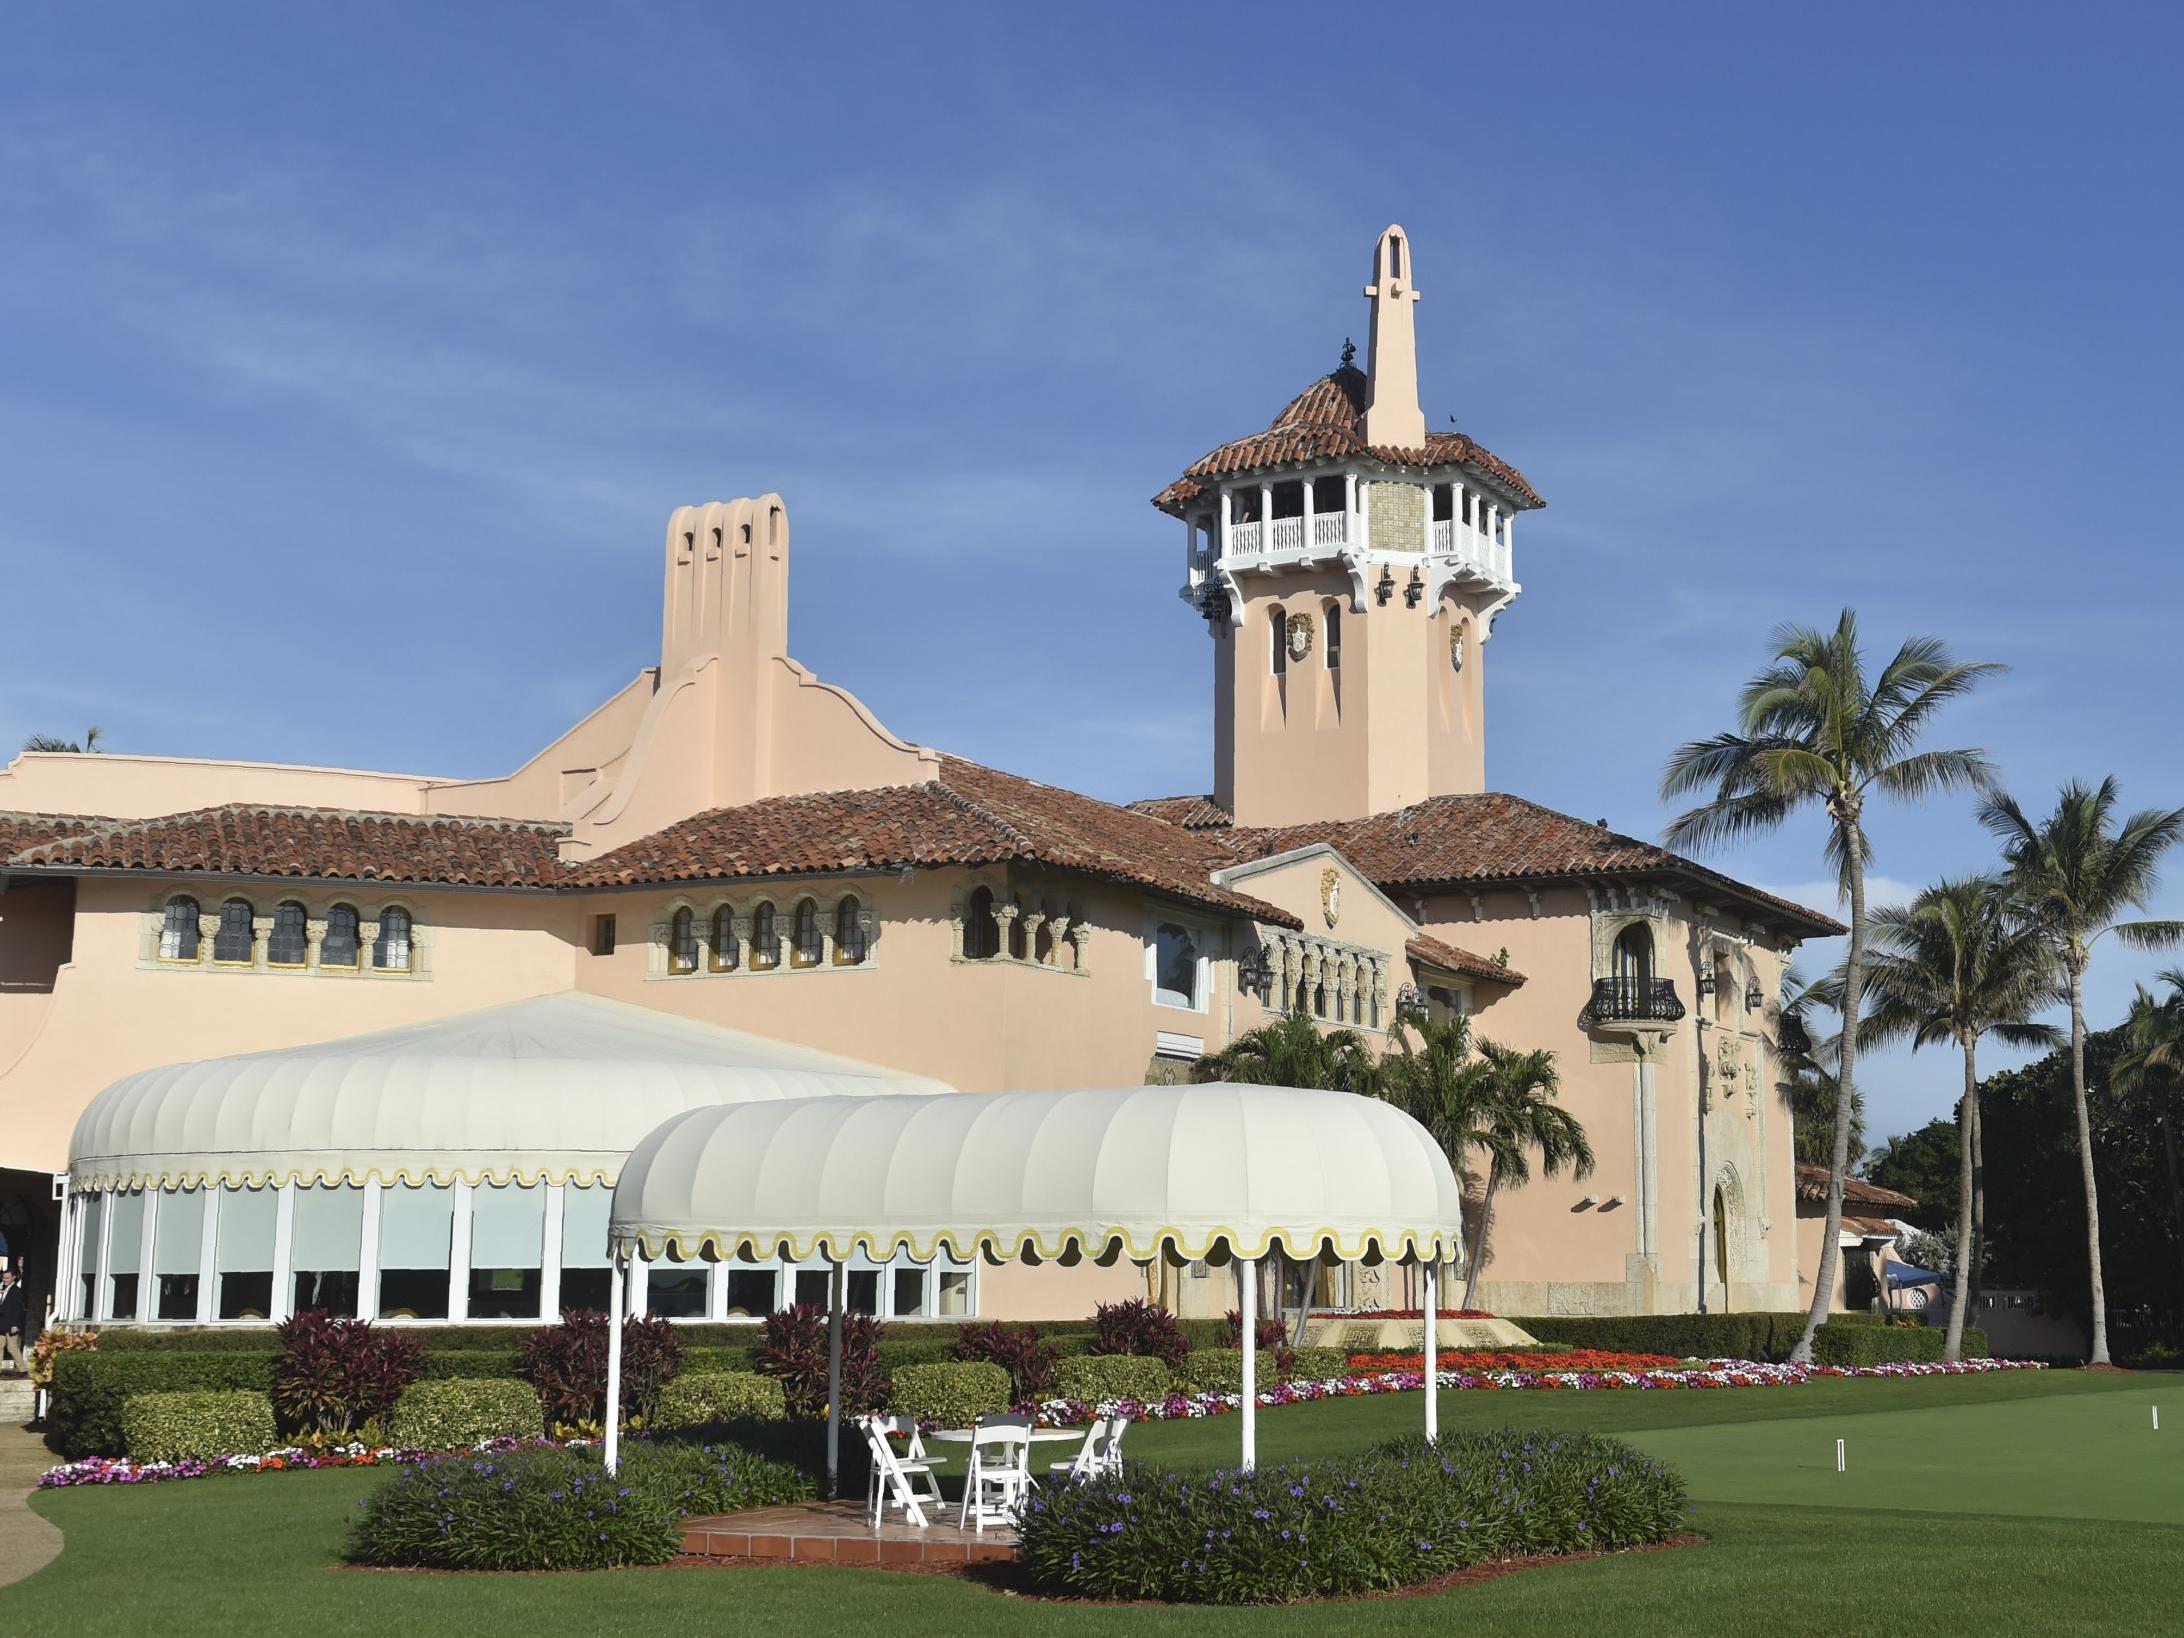 The event was scheduled to be held at Mar-a-Lago on 7 November